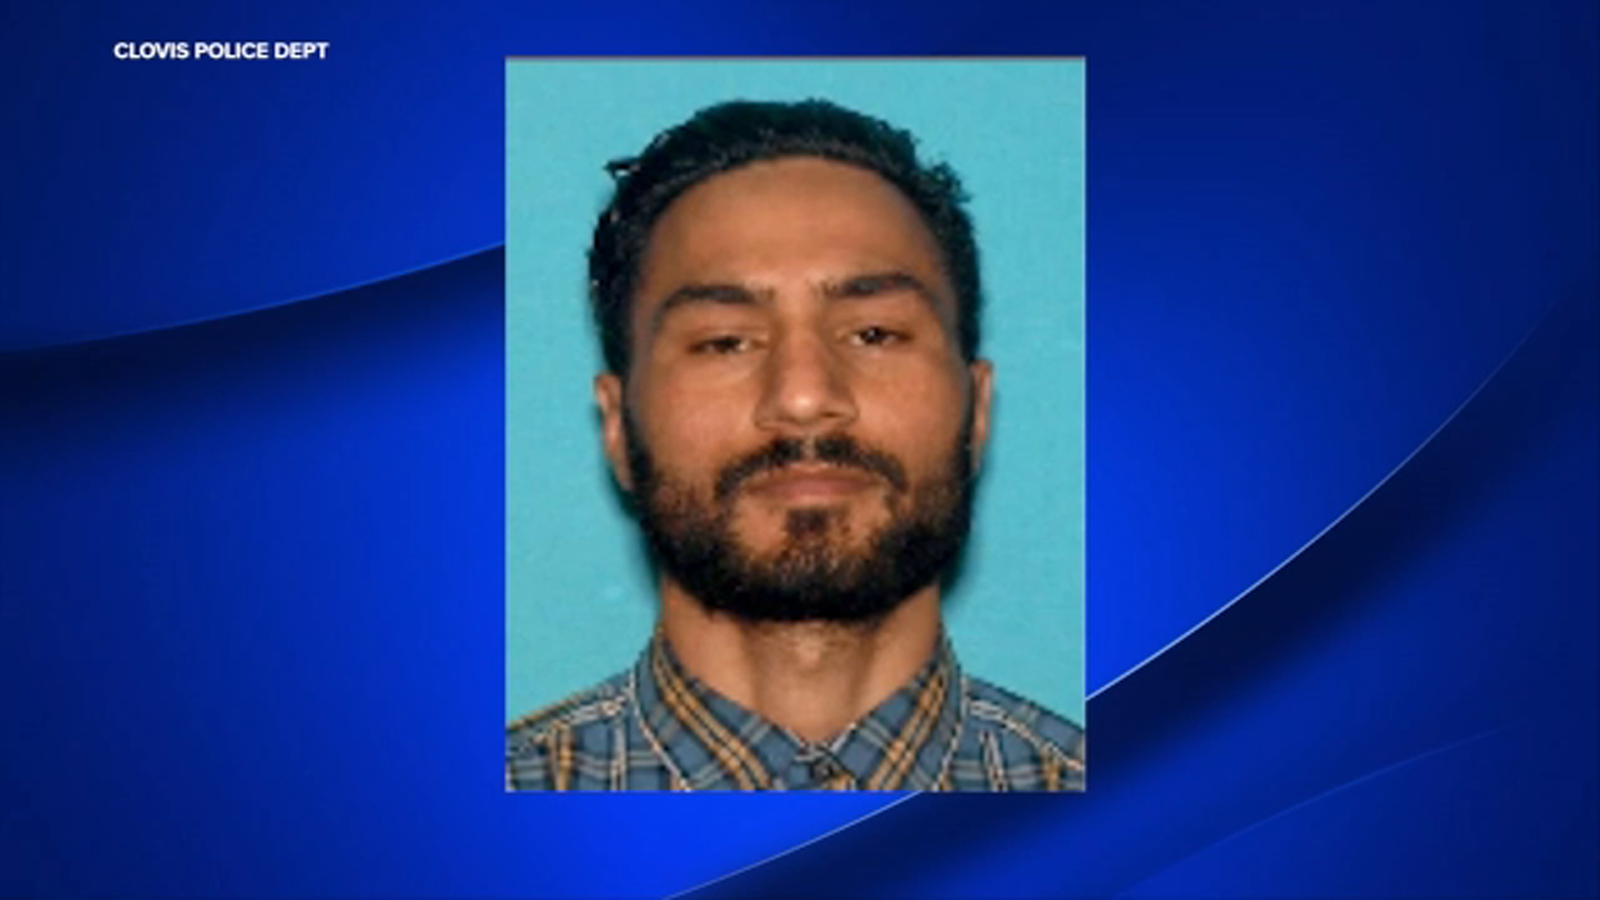 Fake rideshare driver wanted for sexually assaulting woman turns himself in, police say